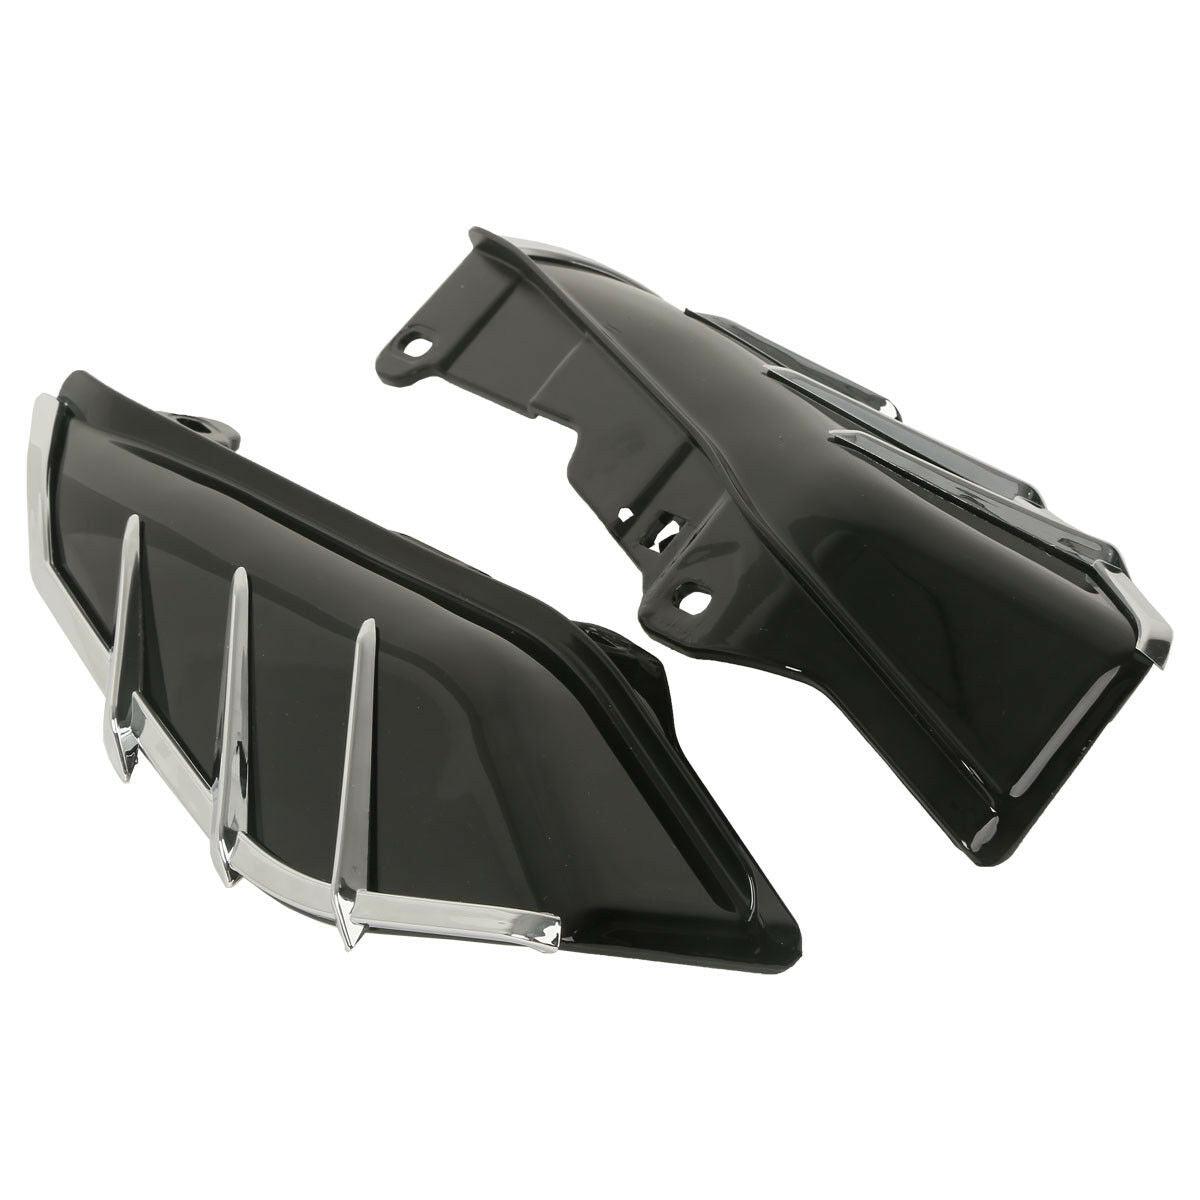 Mid-Frame Air Deflector Fit For Harley Touring Road King Electra Glide 2009-2016 - Moto Life Products